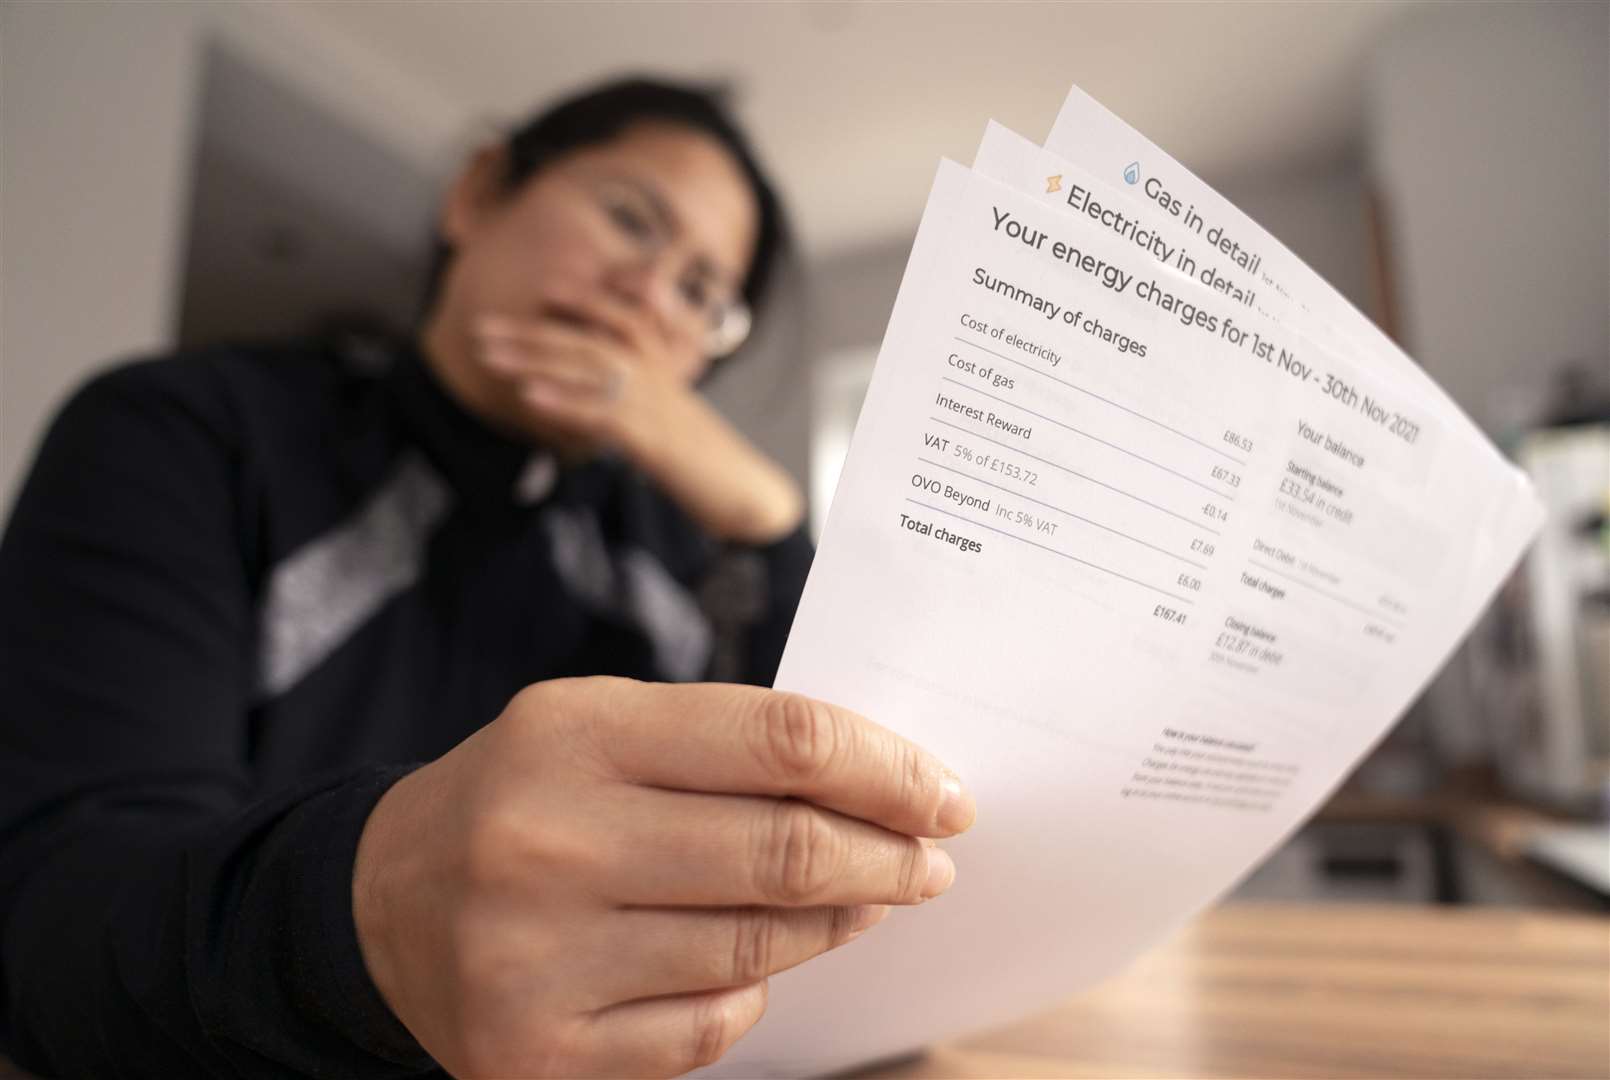 Bills in certain regions can leave households over £100 worse off (Danny Lawson/PA)